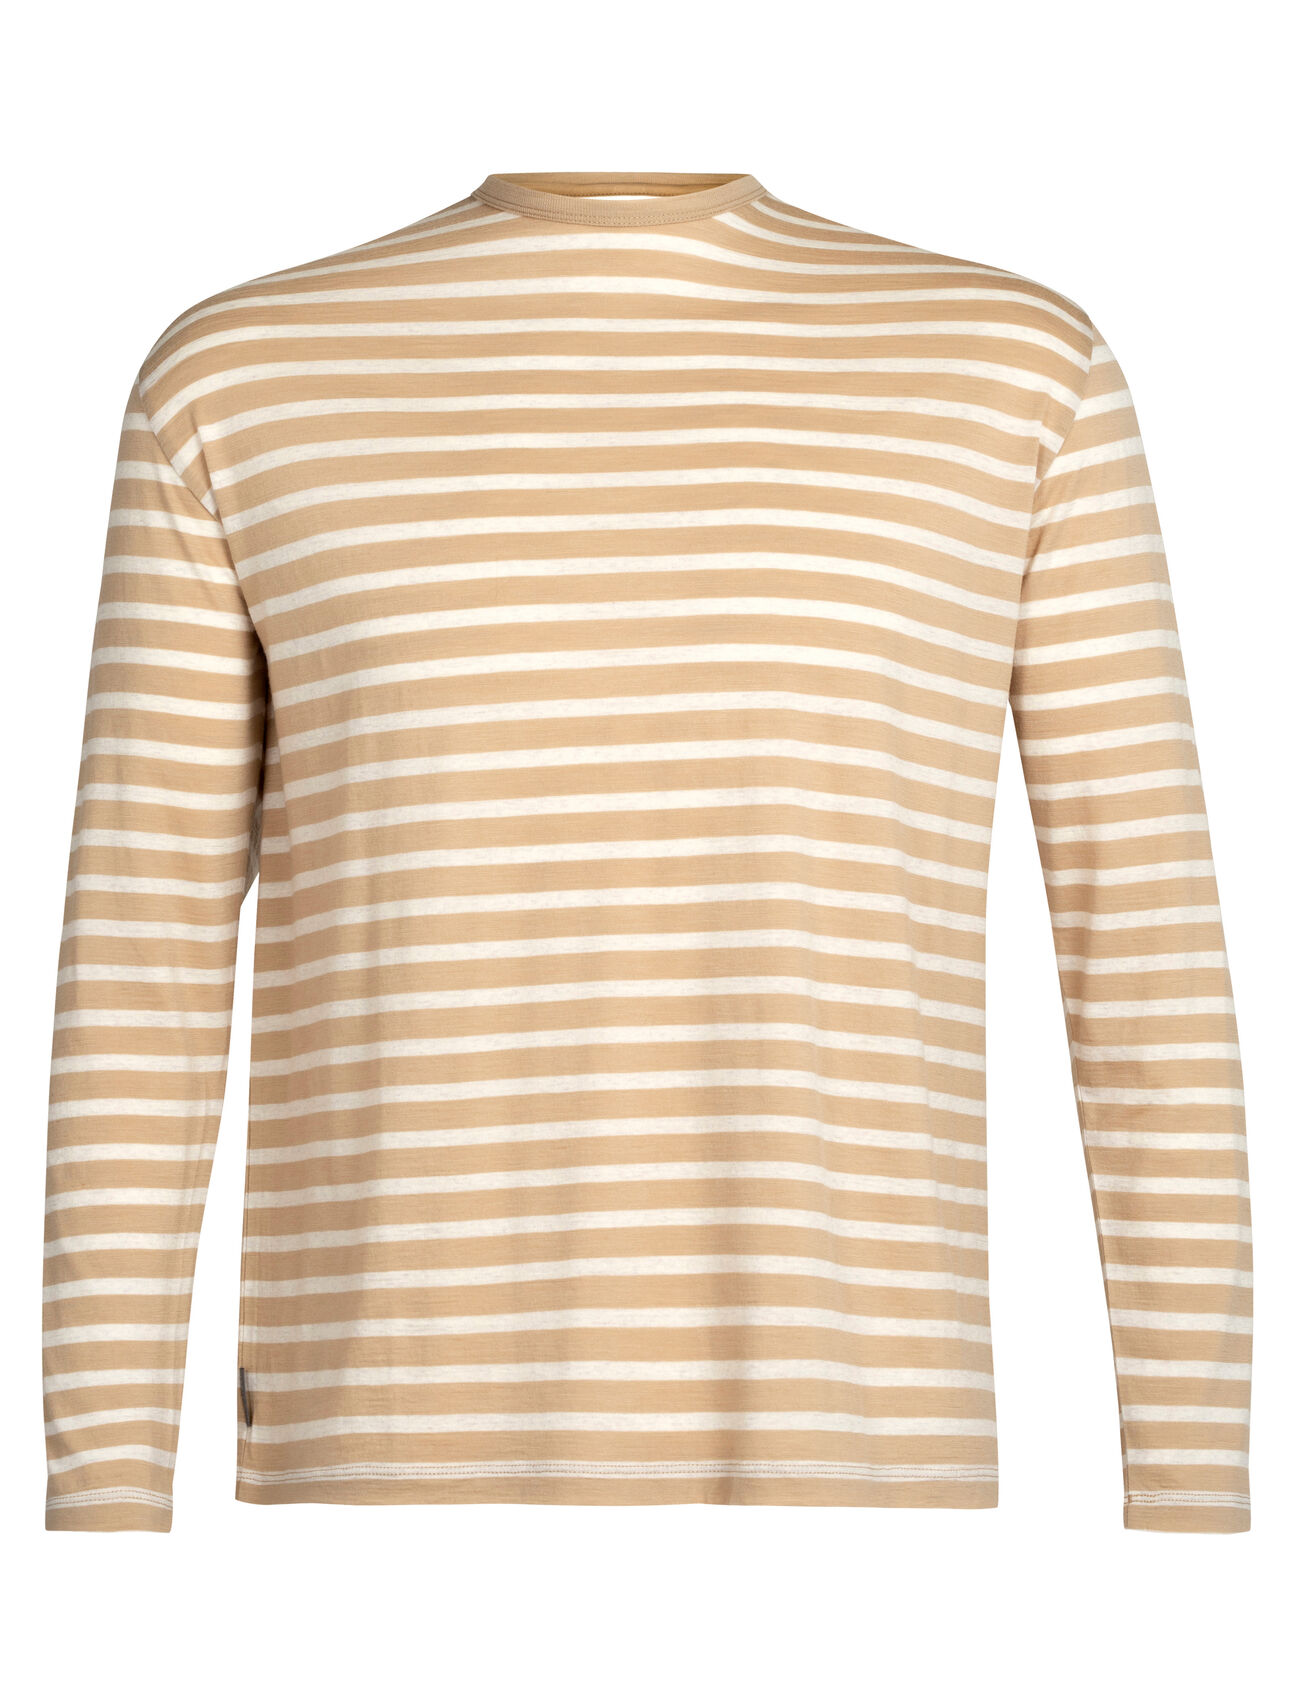 Mens Merino Granary Long Sleeve Stripe T-Shirt A classic striped tee with a relaxed fit and soft, breathable, 100% merino wool fabric, the Granary Long Sleeve Tee Stripe is all about everyday, all-natural comfort.